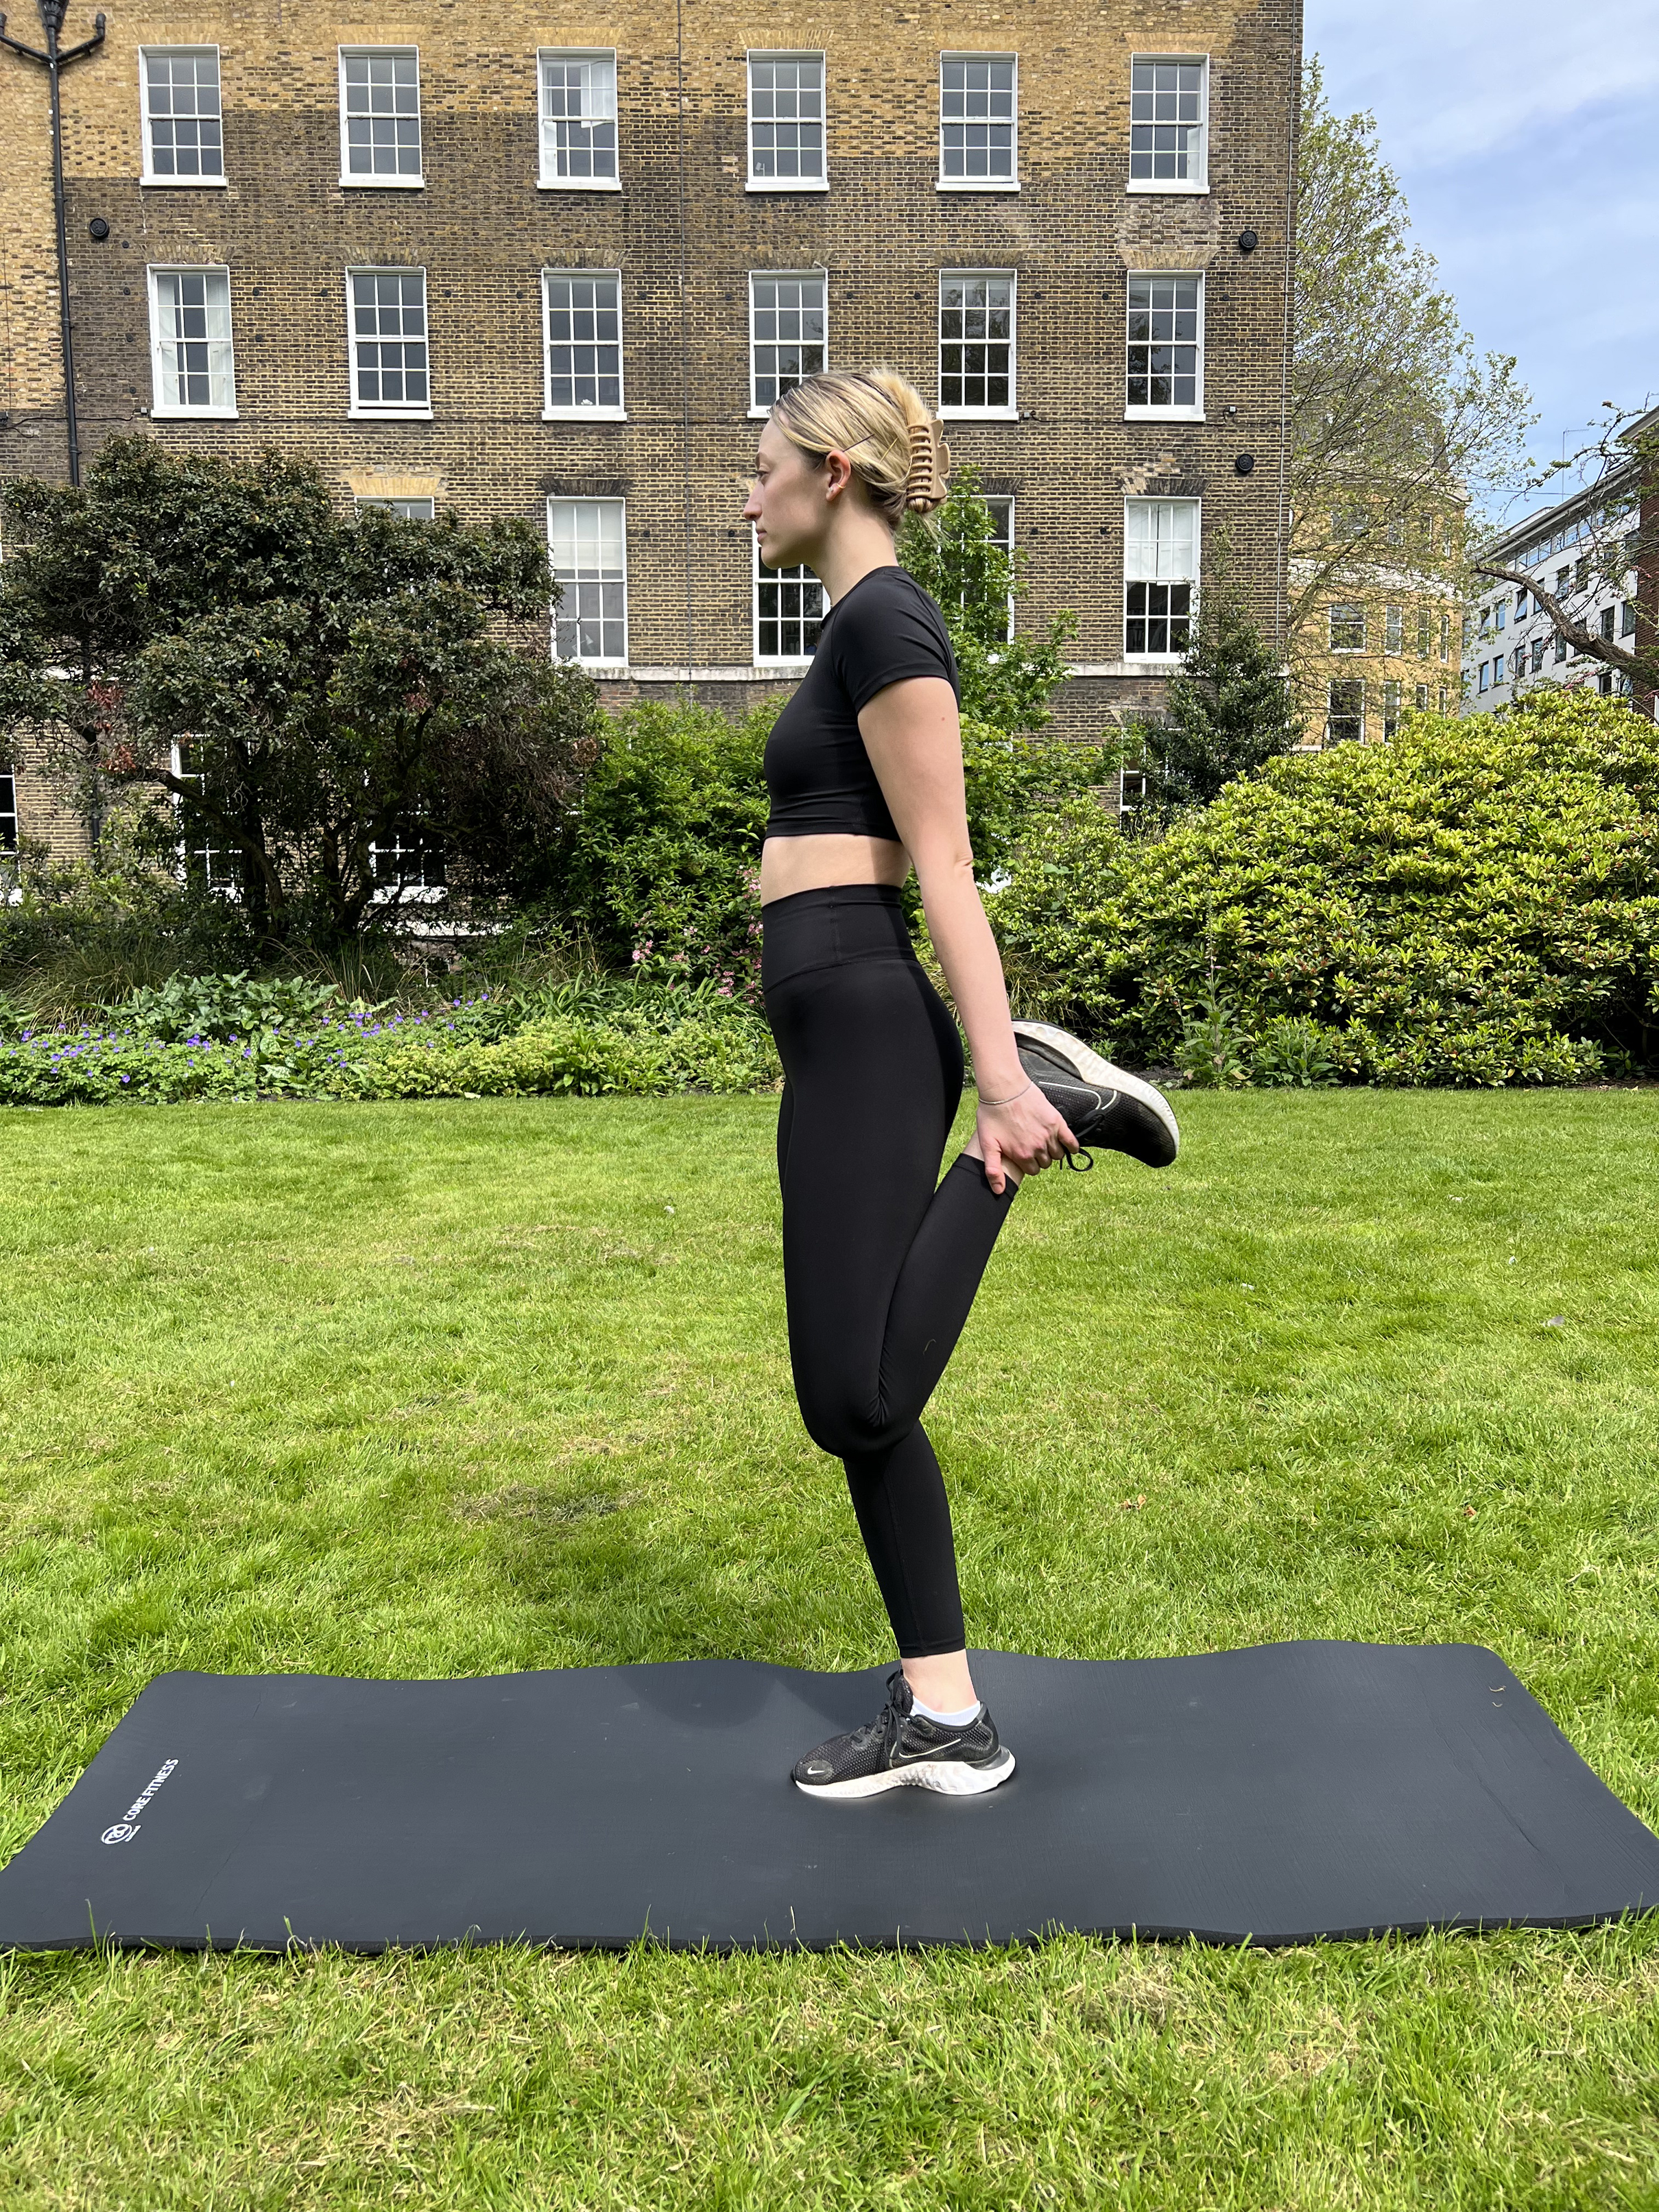 A woman in a garden doing a quadriceps stretch (Until/PA)